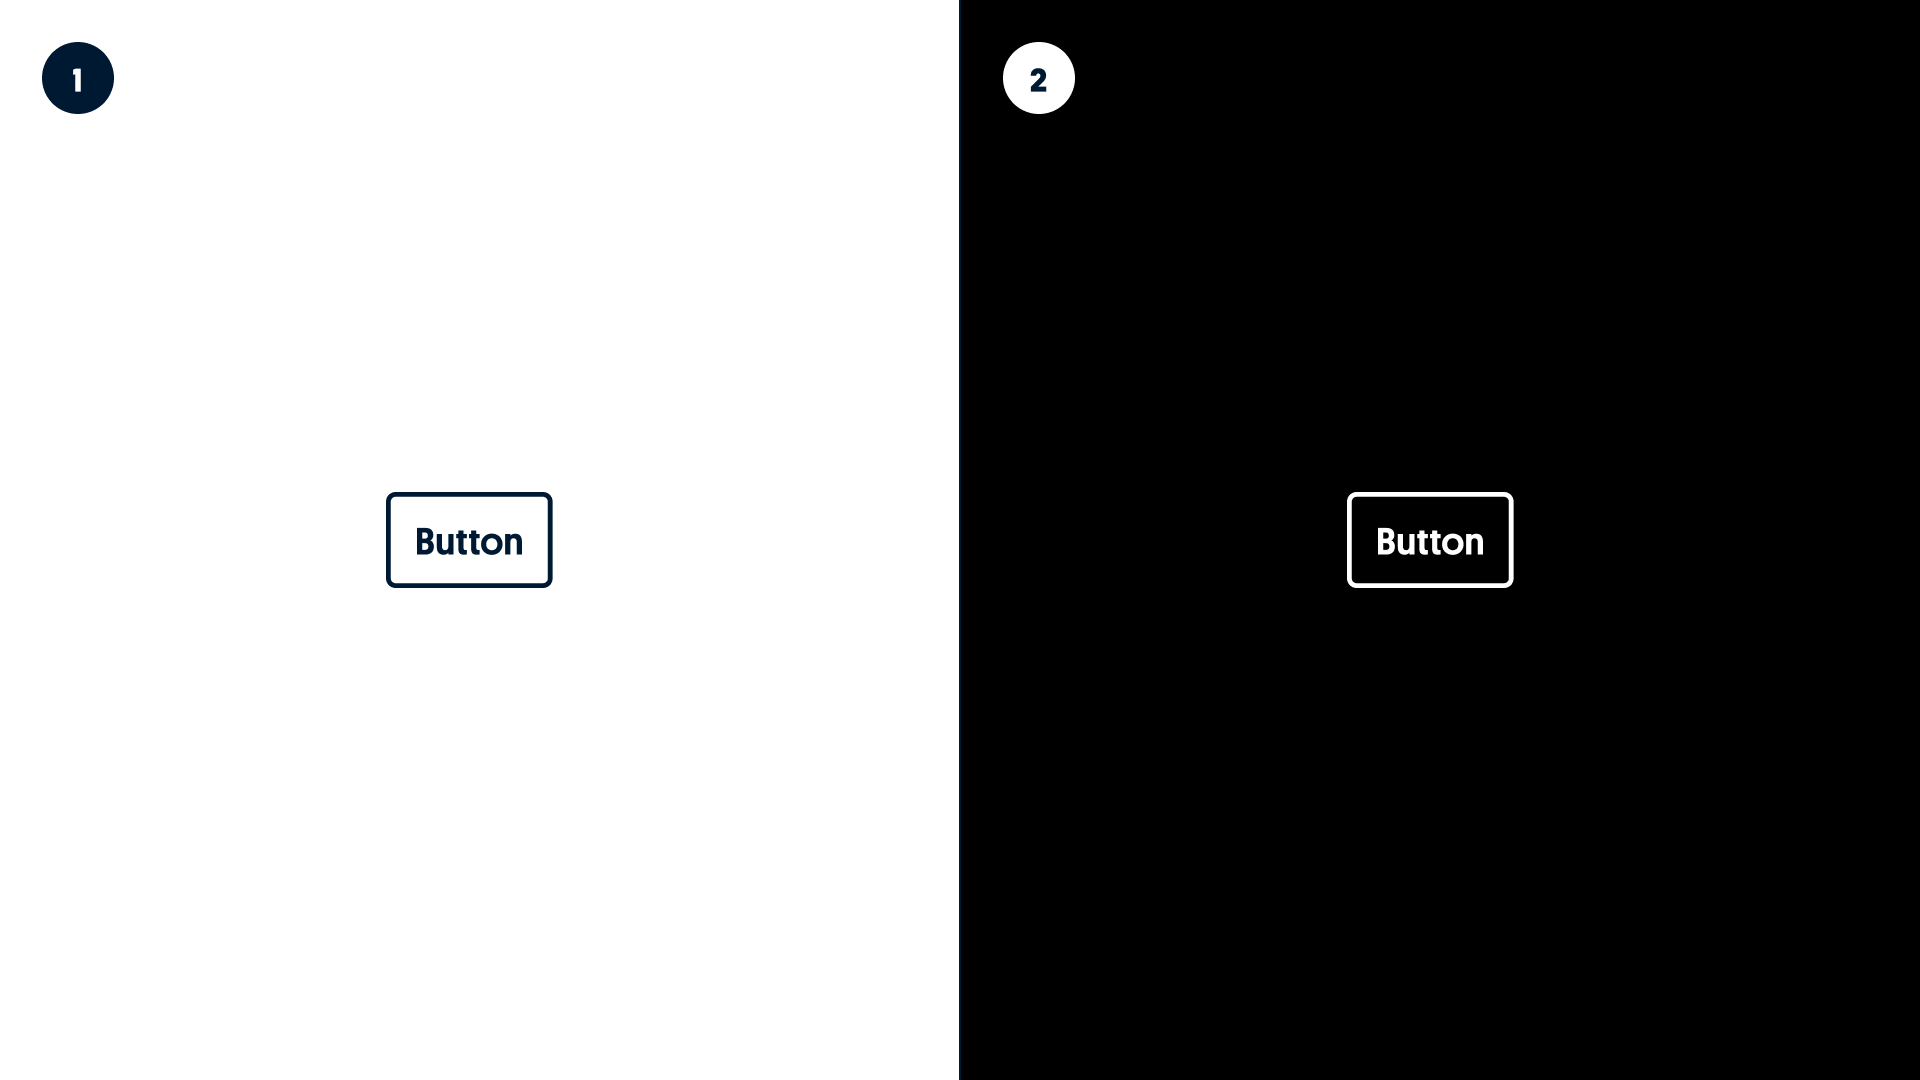 Secondary buttons